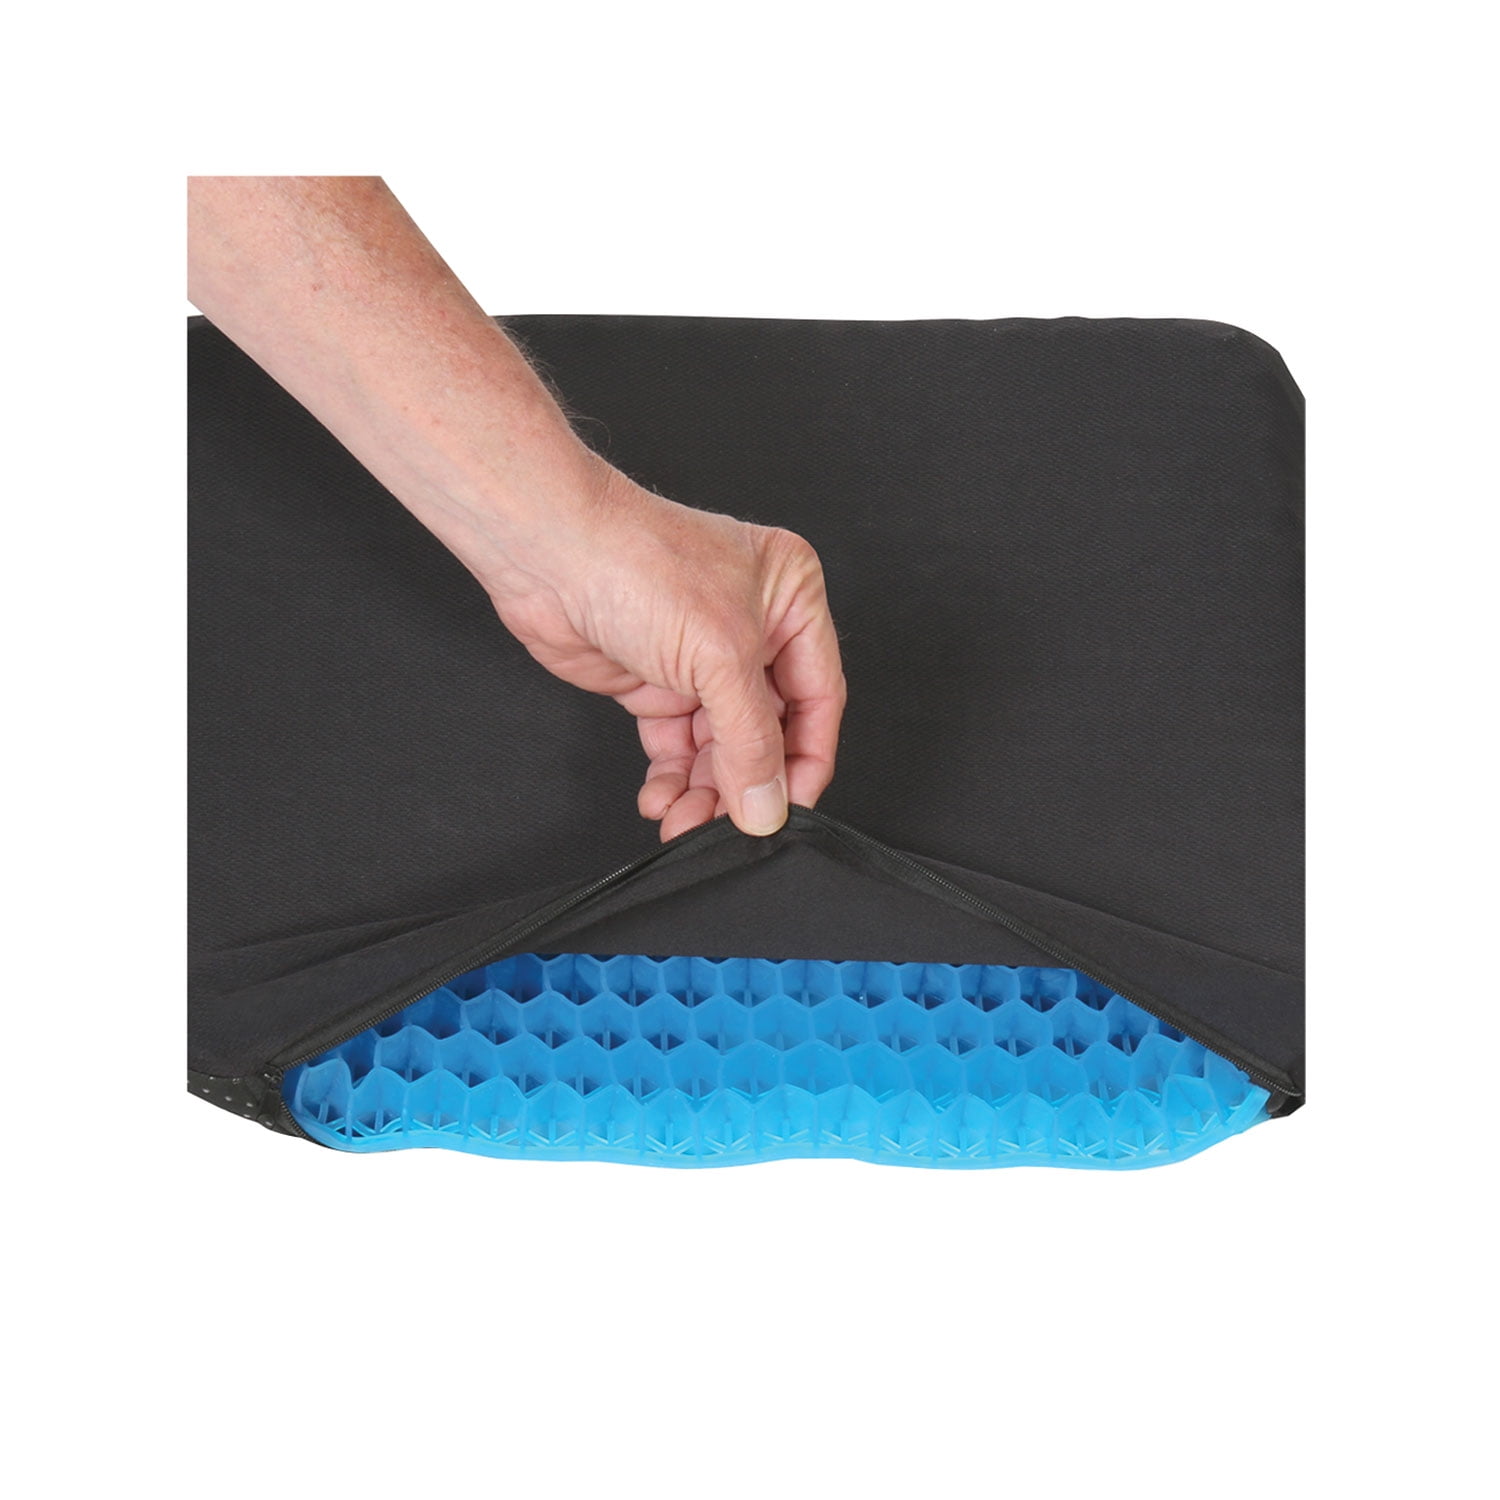 SelectSoma Gel Seat Cushion for Long Sitting Pressure Relief for Back,  Sciatica, Coccyx, Tailbone Pain – Wheelchair Cushions, Car and Truck Seat